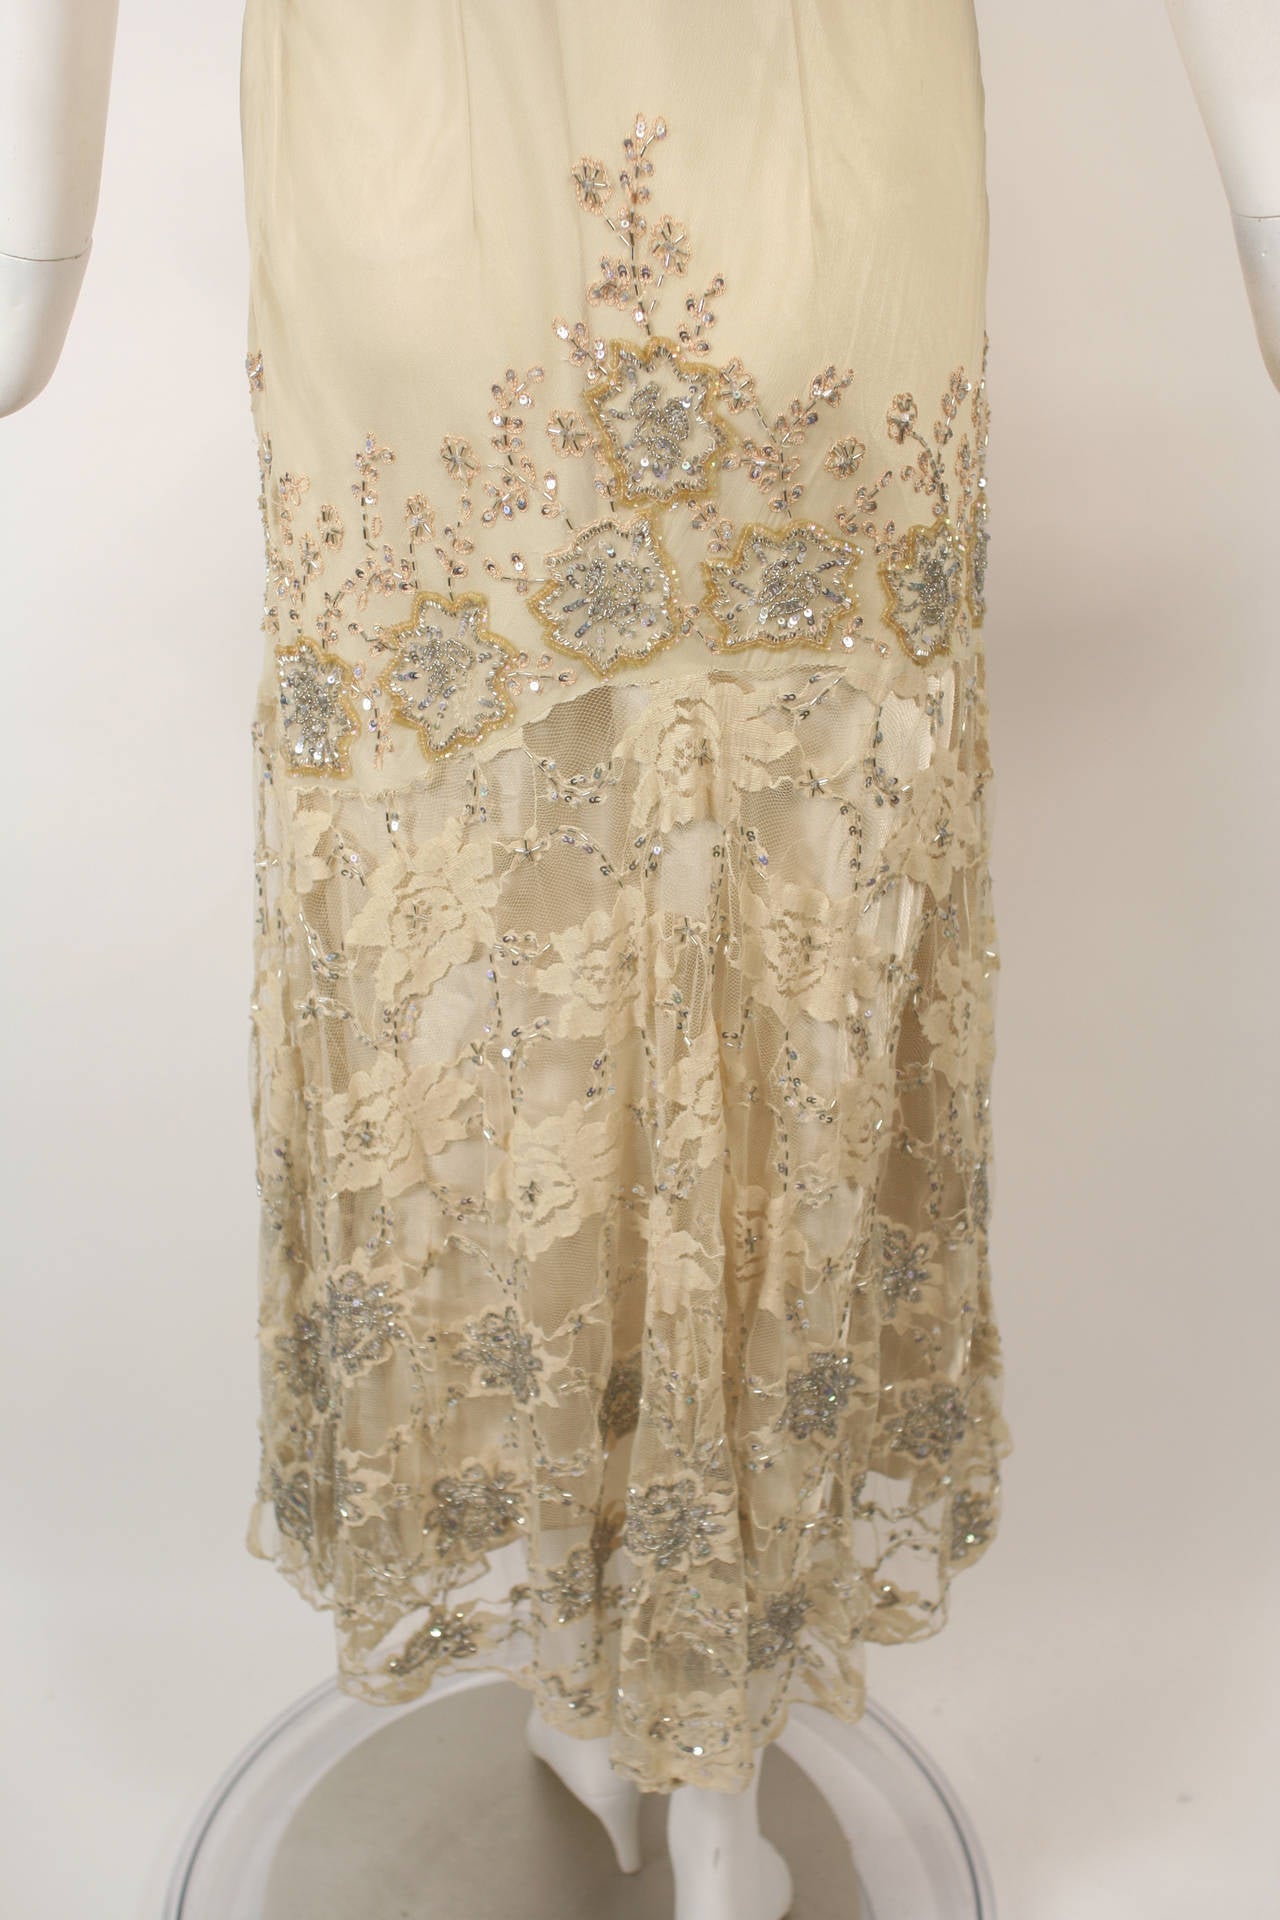 Exquisite Vintage Valentino Beaded Ivory Dress Gown For Sale 2